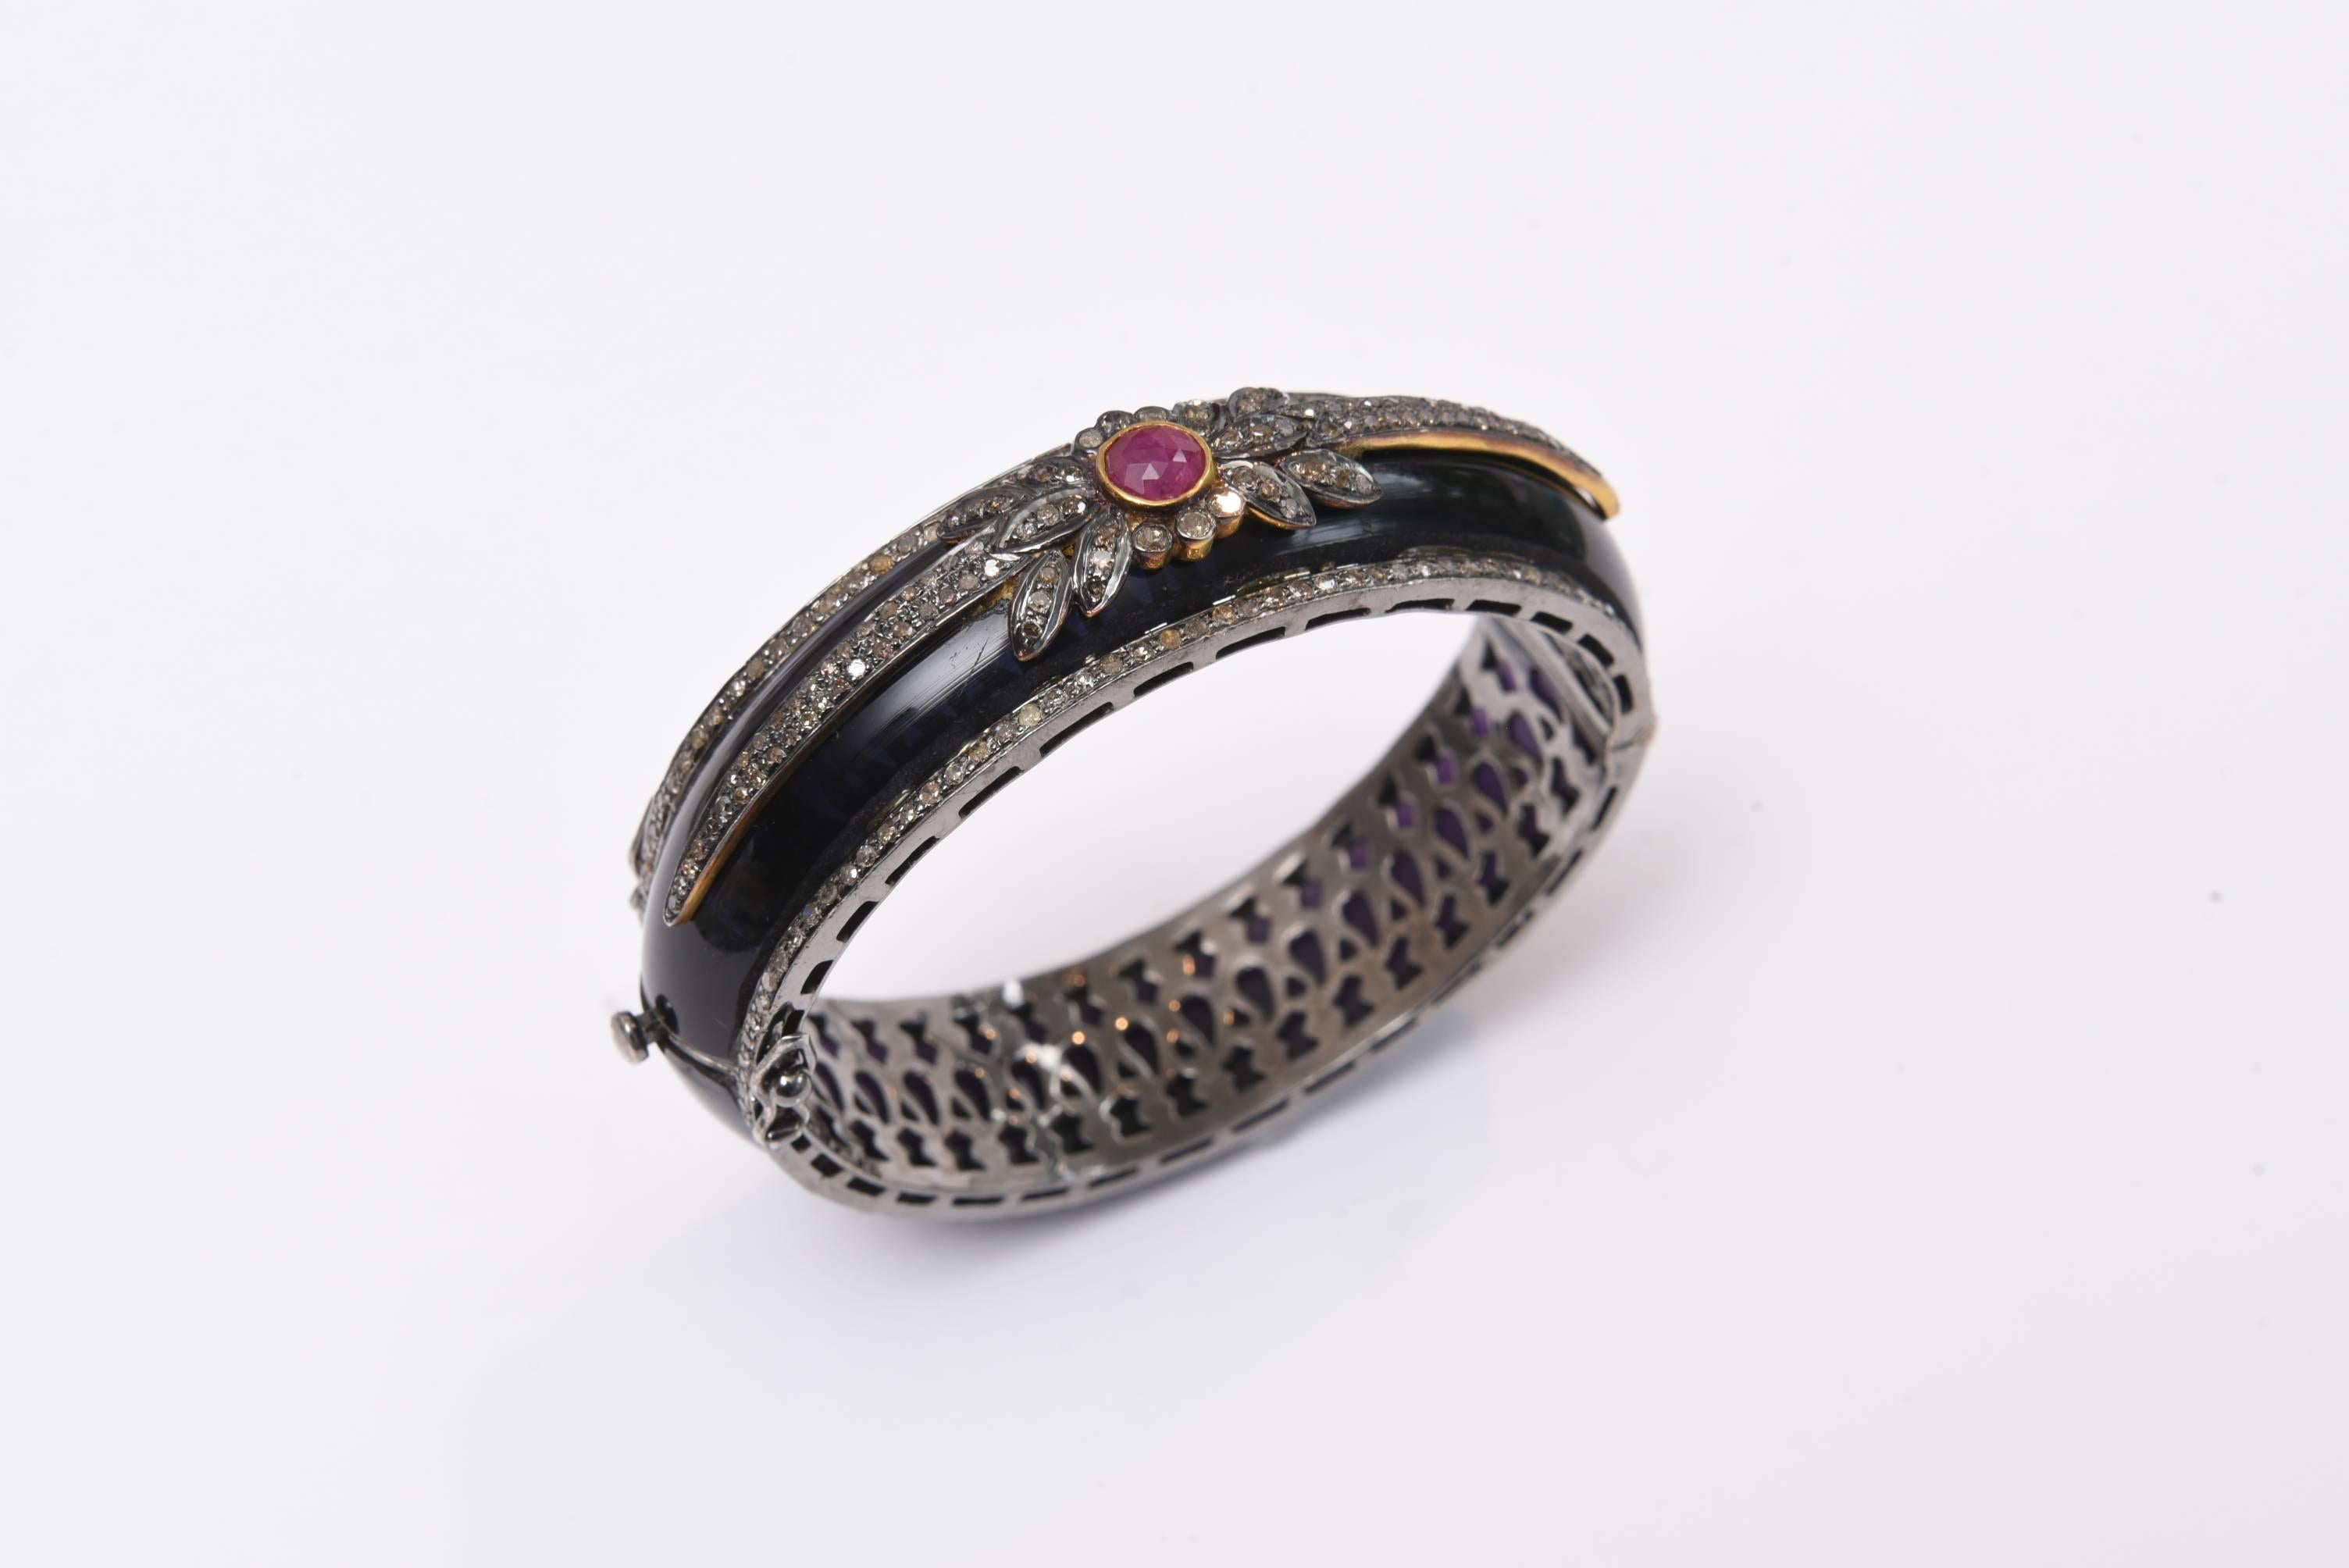 Black bakelite cuff bracelet with a border of pave` set diamonds and a lovely design of diamonds and faceted ruby on the top, set in sterling silver.  It's an oval shape which is great as it keeps the bracelet from turning around. Carat weight of